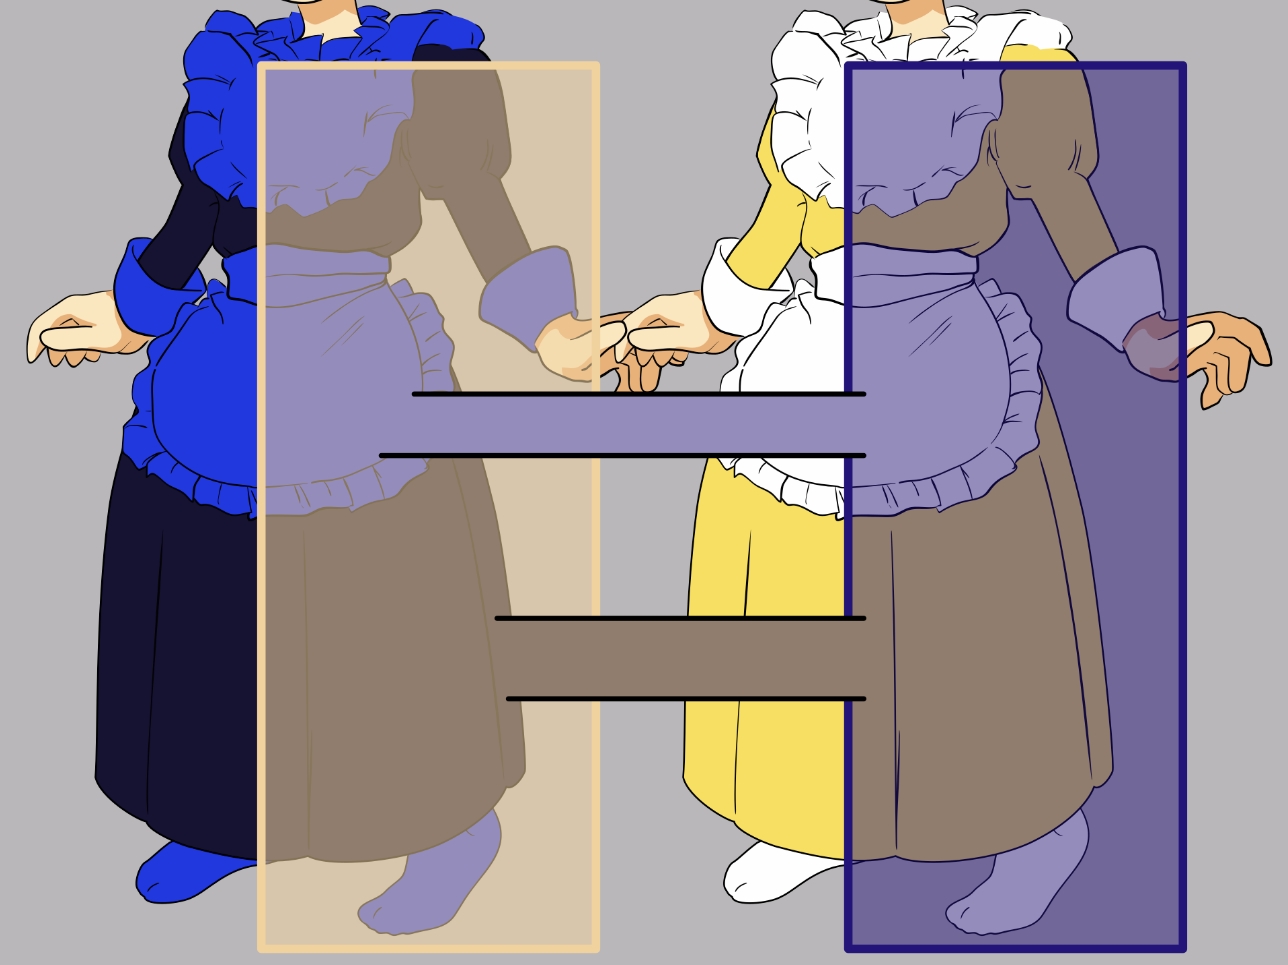 Wikipe-tan wearing a version of "The dress". The dress can be interpreted in two ways: black and blue under a yellow-tinted illumination (left figure) or gold and white under a blue-tinted illumination (right figure).